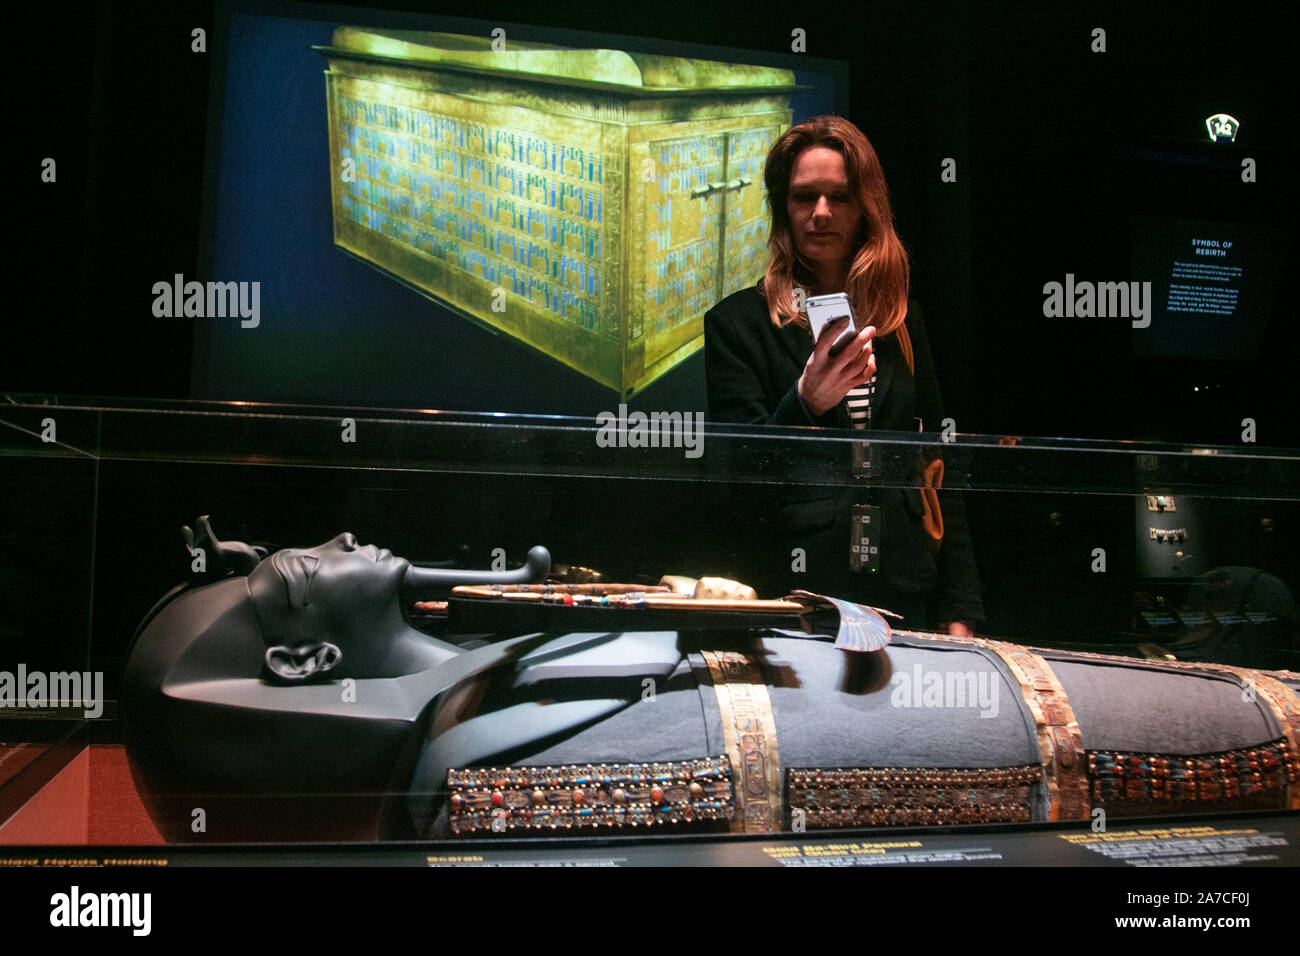 Saatchi Gallery London, UK. 1 November 2019. A preview  featuring the largest collection of 60 of   treasures  and original artifacts from Tutankhamun's tomb ever to leave Egypt. The exhibition at the Saatchi Gallery will run from 2 November until 3 May 2020. amer ghazzal /Alamy live News Stock Photo